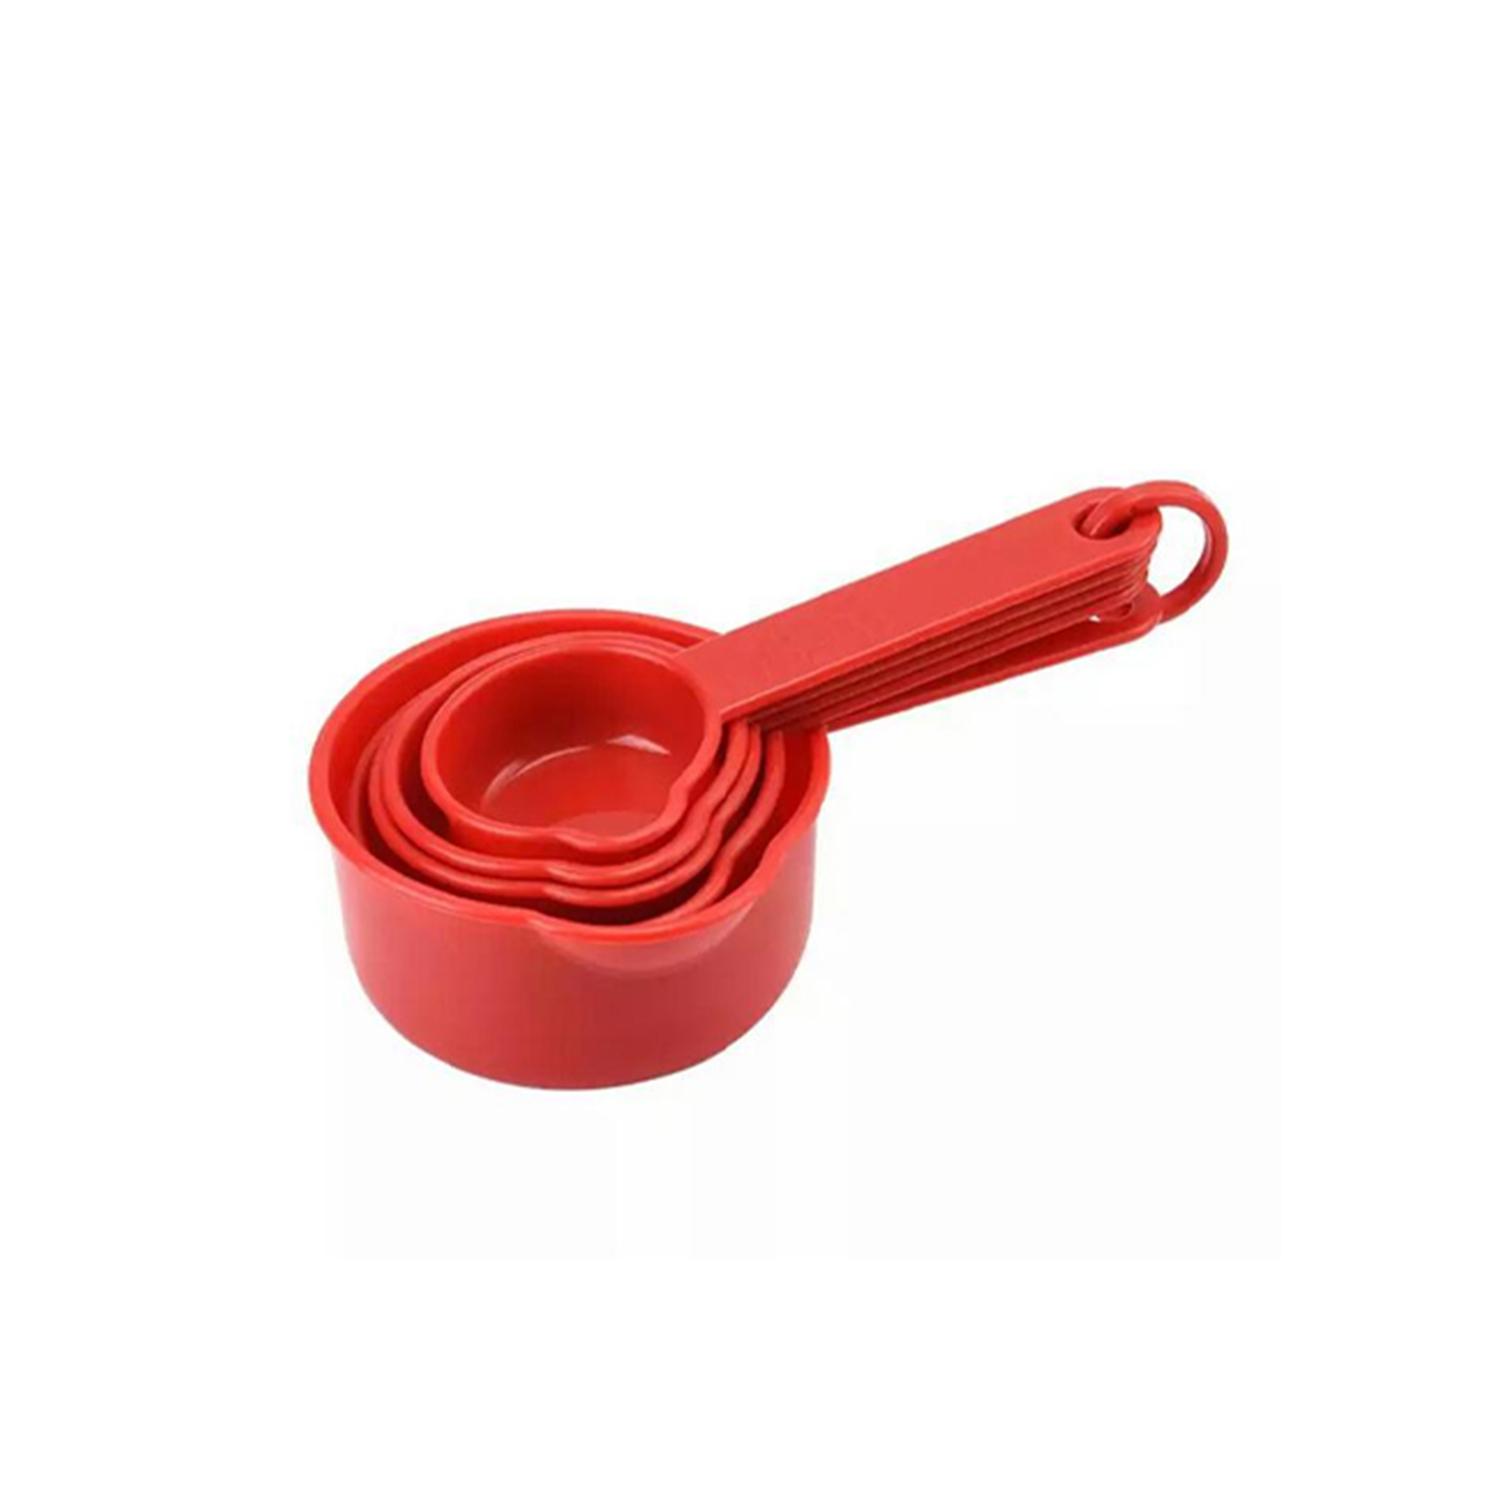 RED MEASURING CUPS SET OF 5